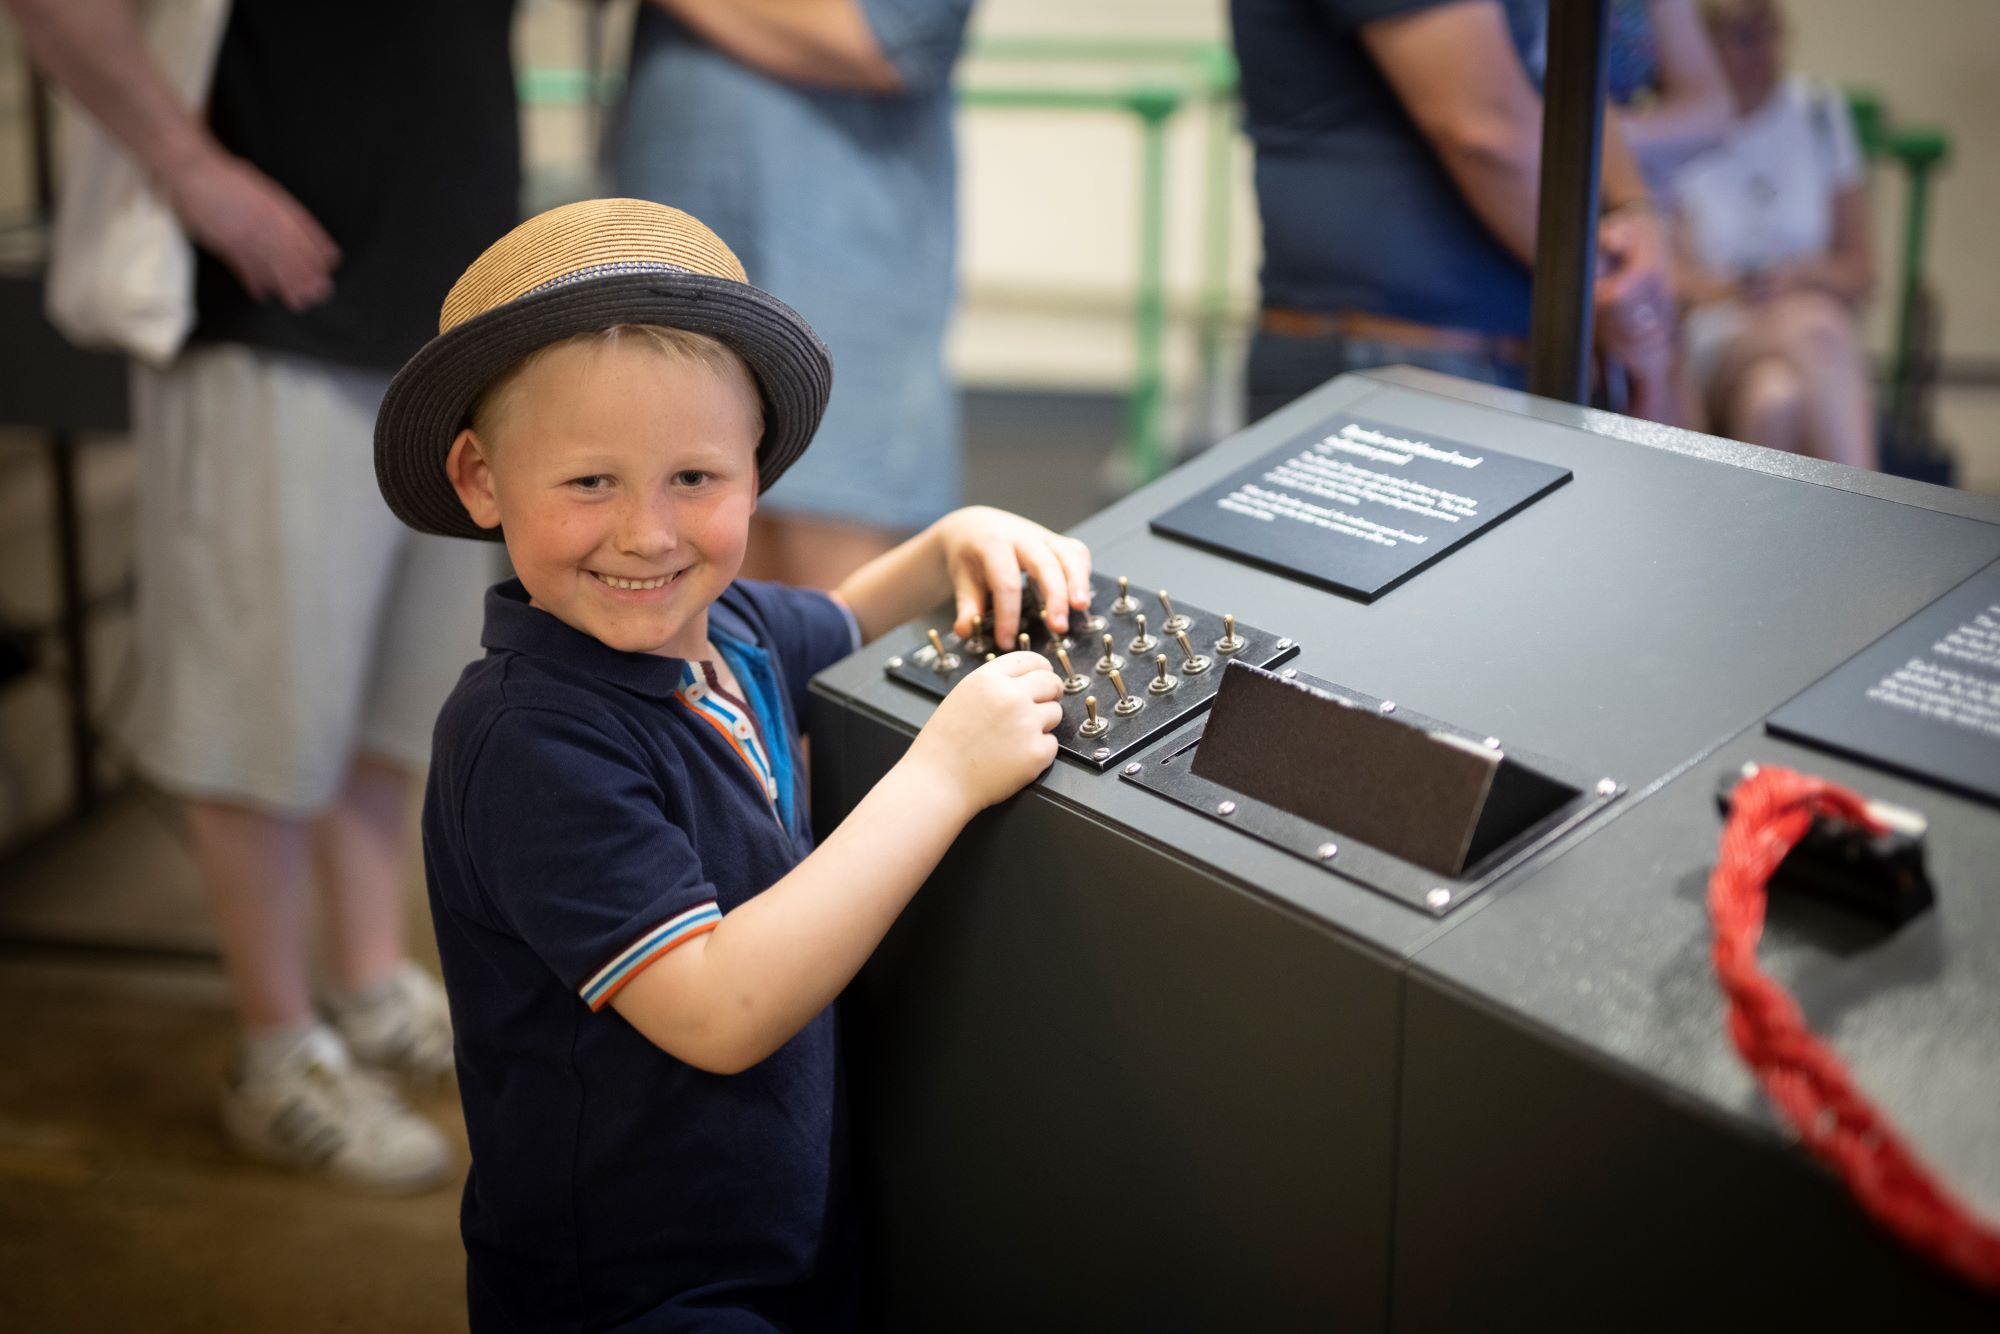 Summer Family Fun at Bletchley Park